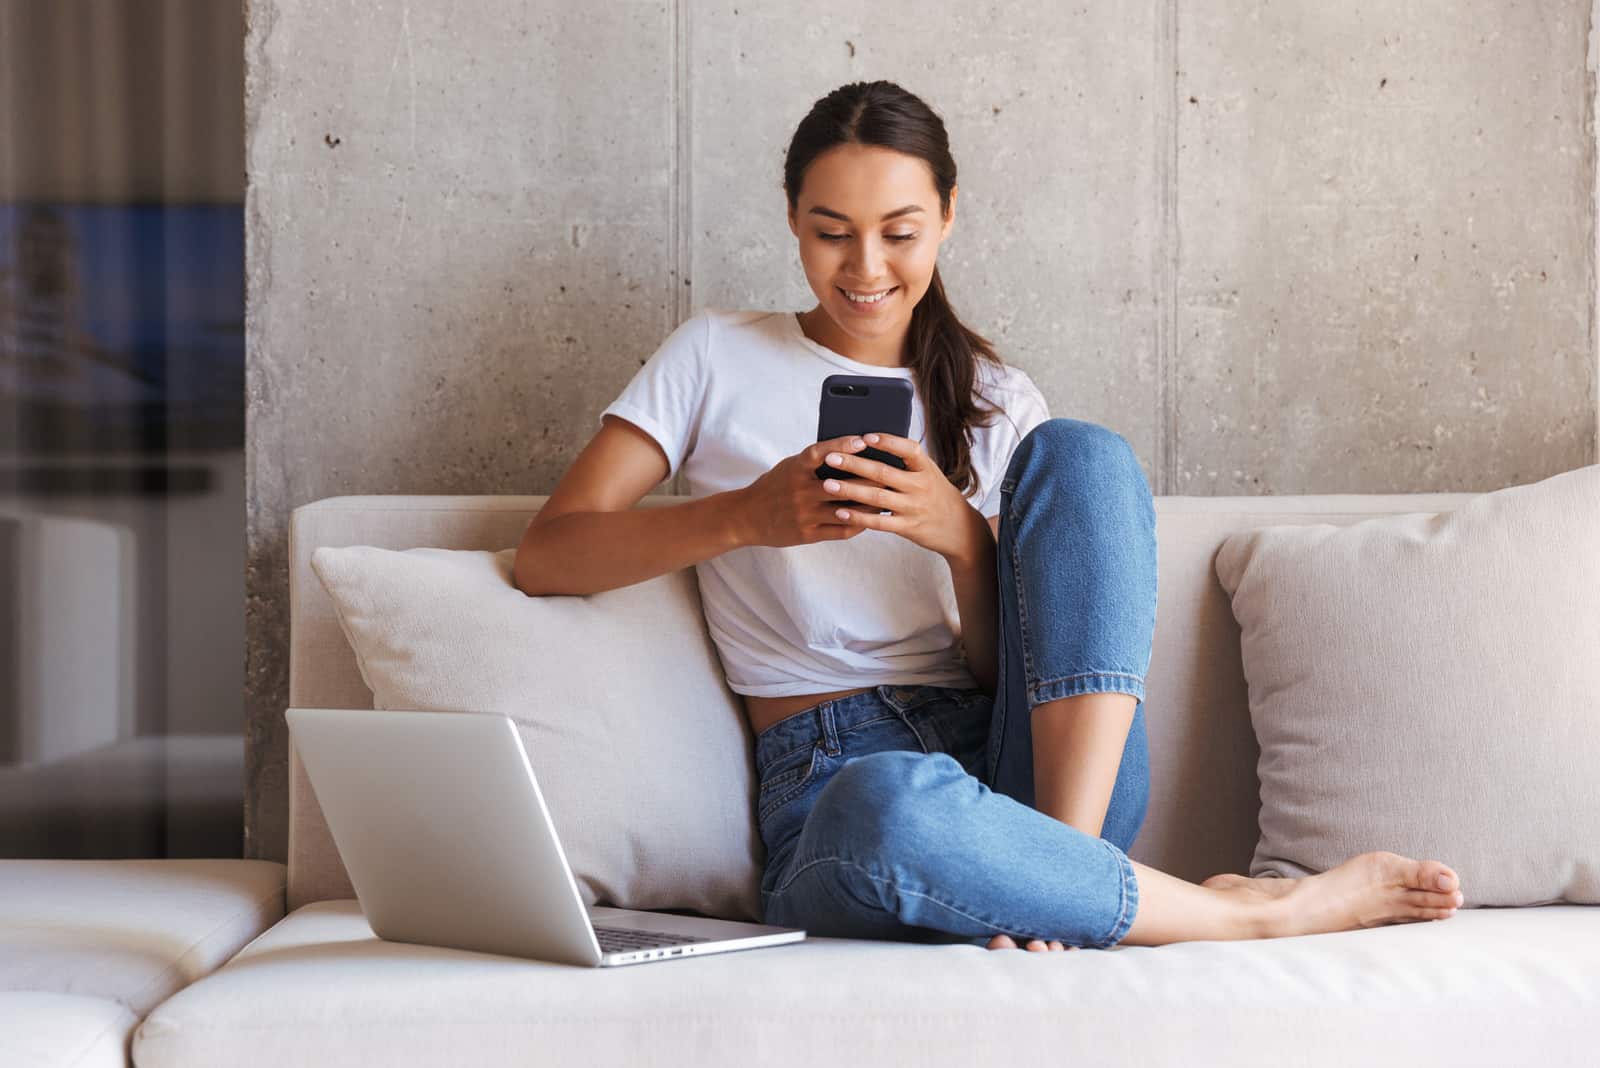 a smiling woman with tied hair is sitting on the couch holding a phone in her hand